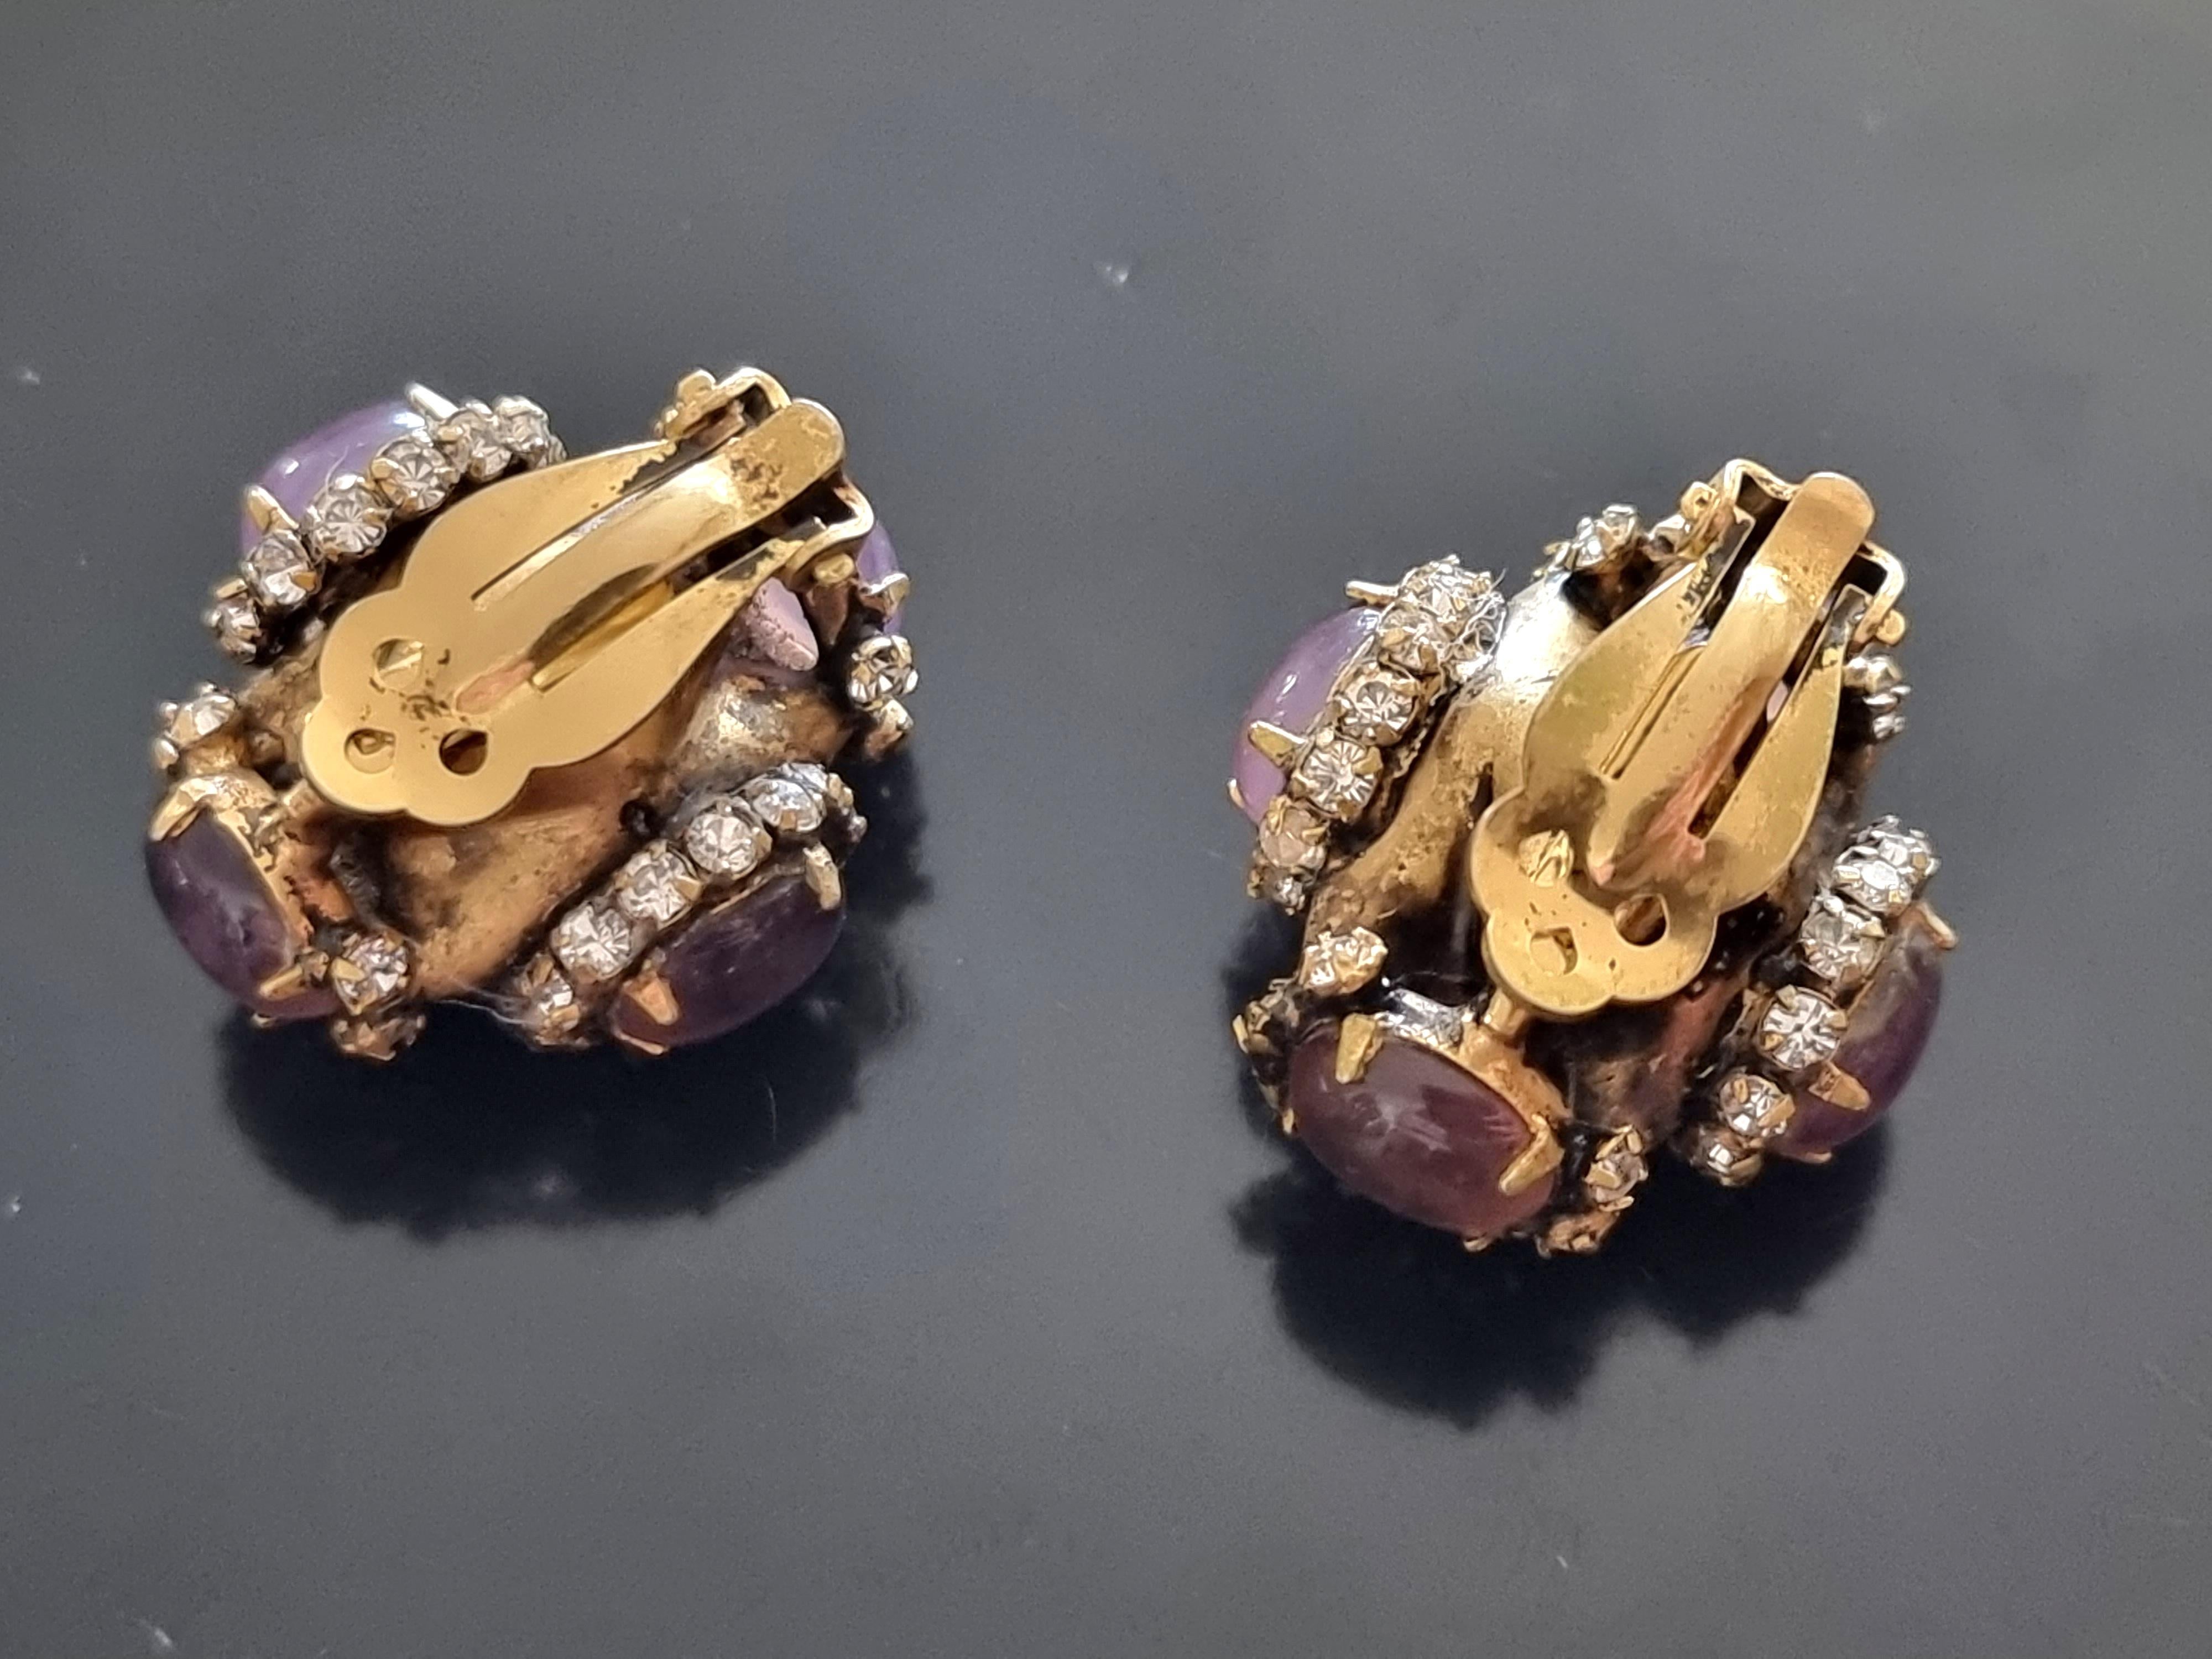 Iradj Moini, Clip-on EARRINGS, vintage, glass cabochons, rhinestones For Sale 4